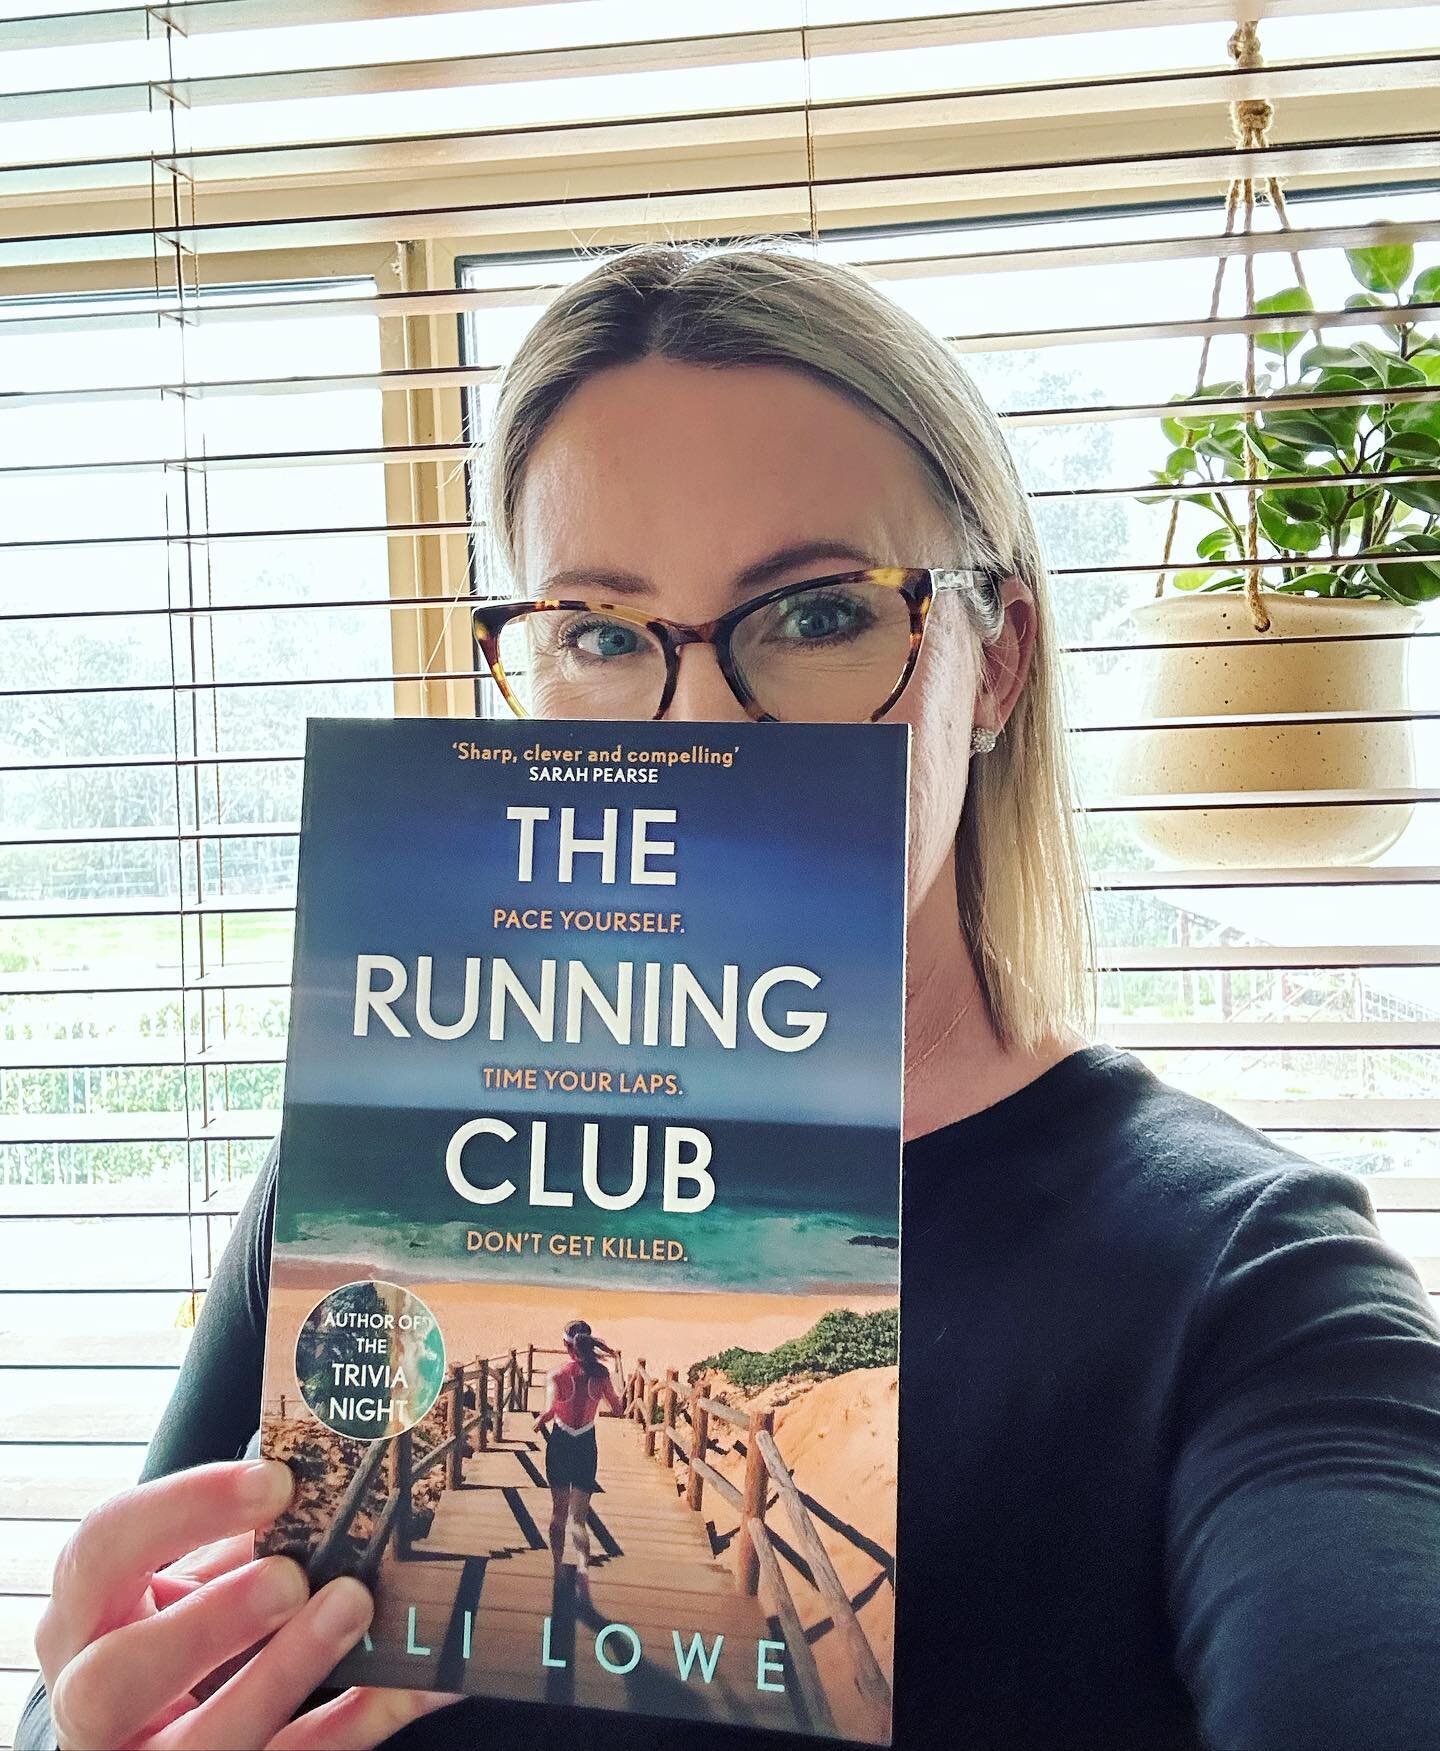 BOOK RECOMMENDATION
I really enjoyed Ali Lowe&rsquo;s 2022 debut novel The Trivia Night but she&rsquo;s topped it with this year&rsquo;s book. The Running Club is a fast-paced, character driven whodunnit that will leave you guessing until the end. Lo